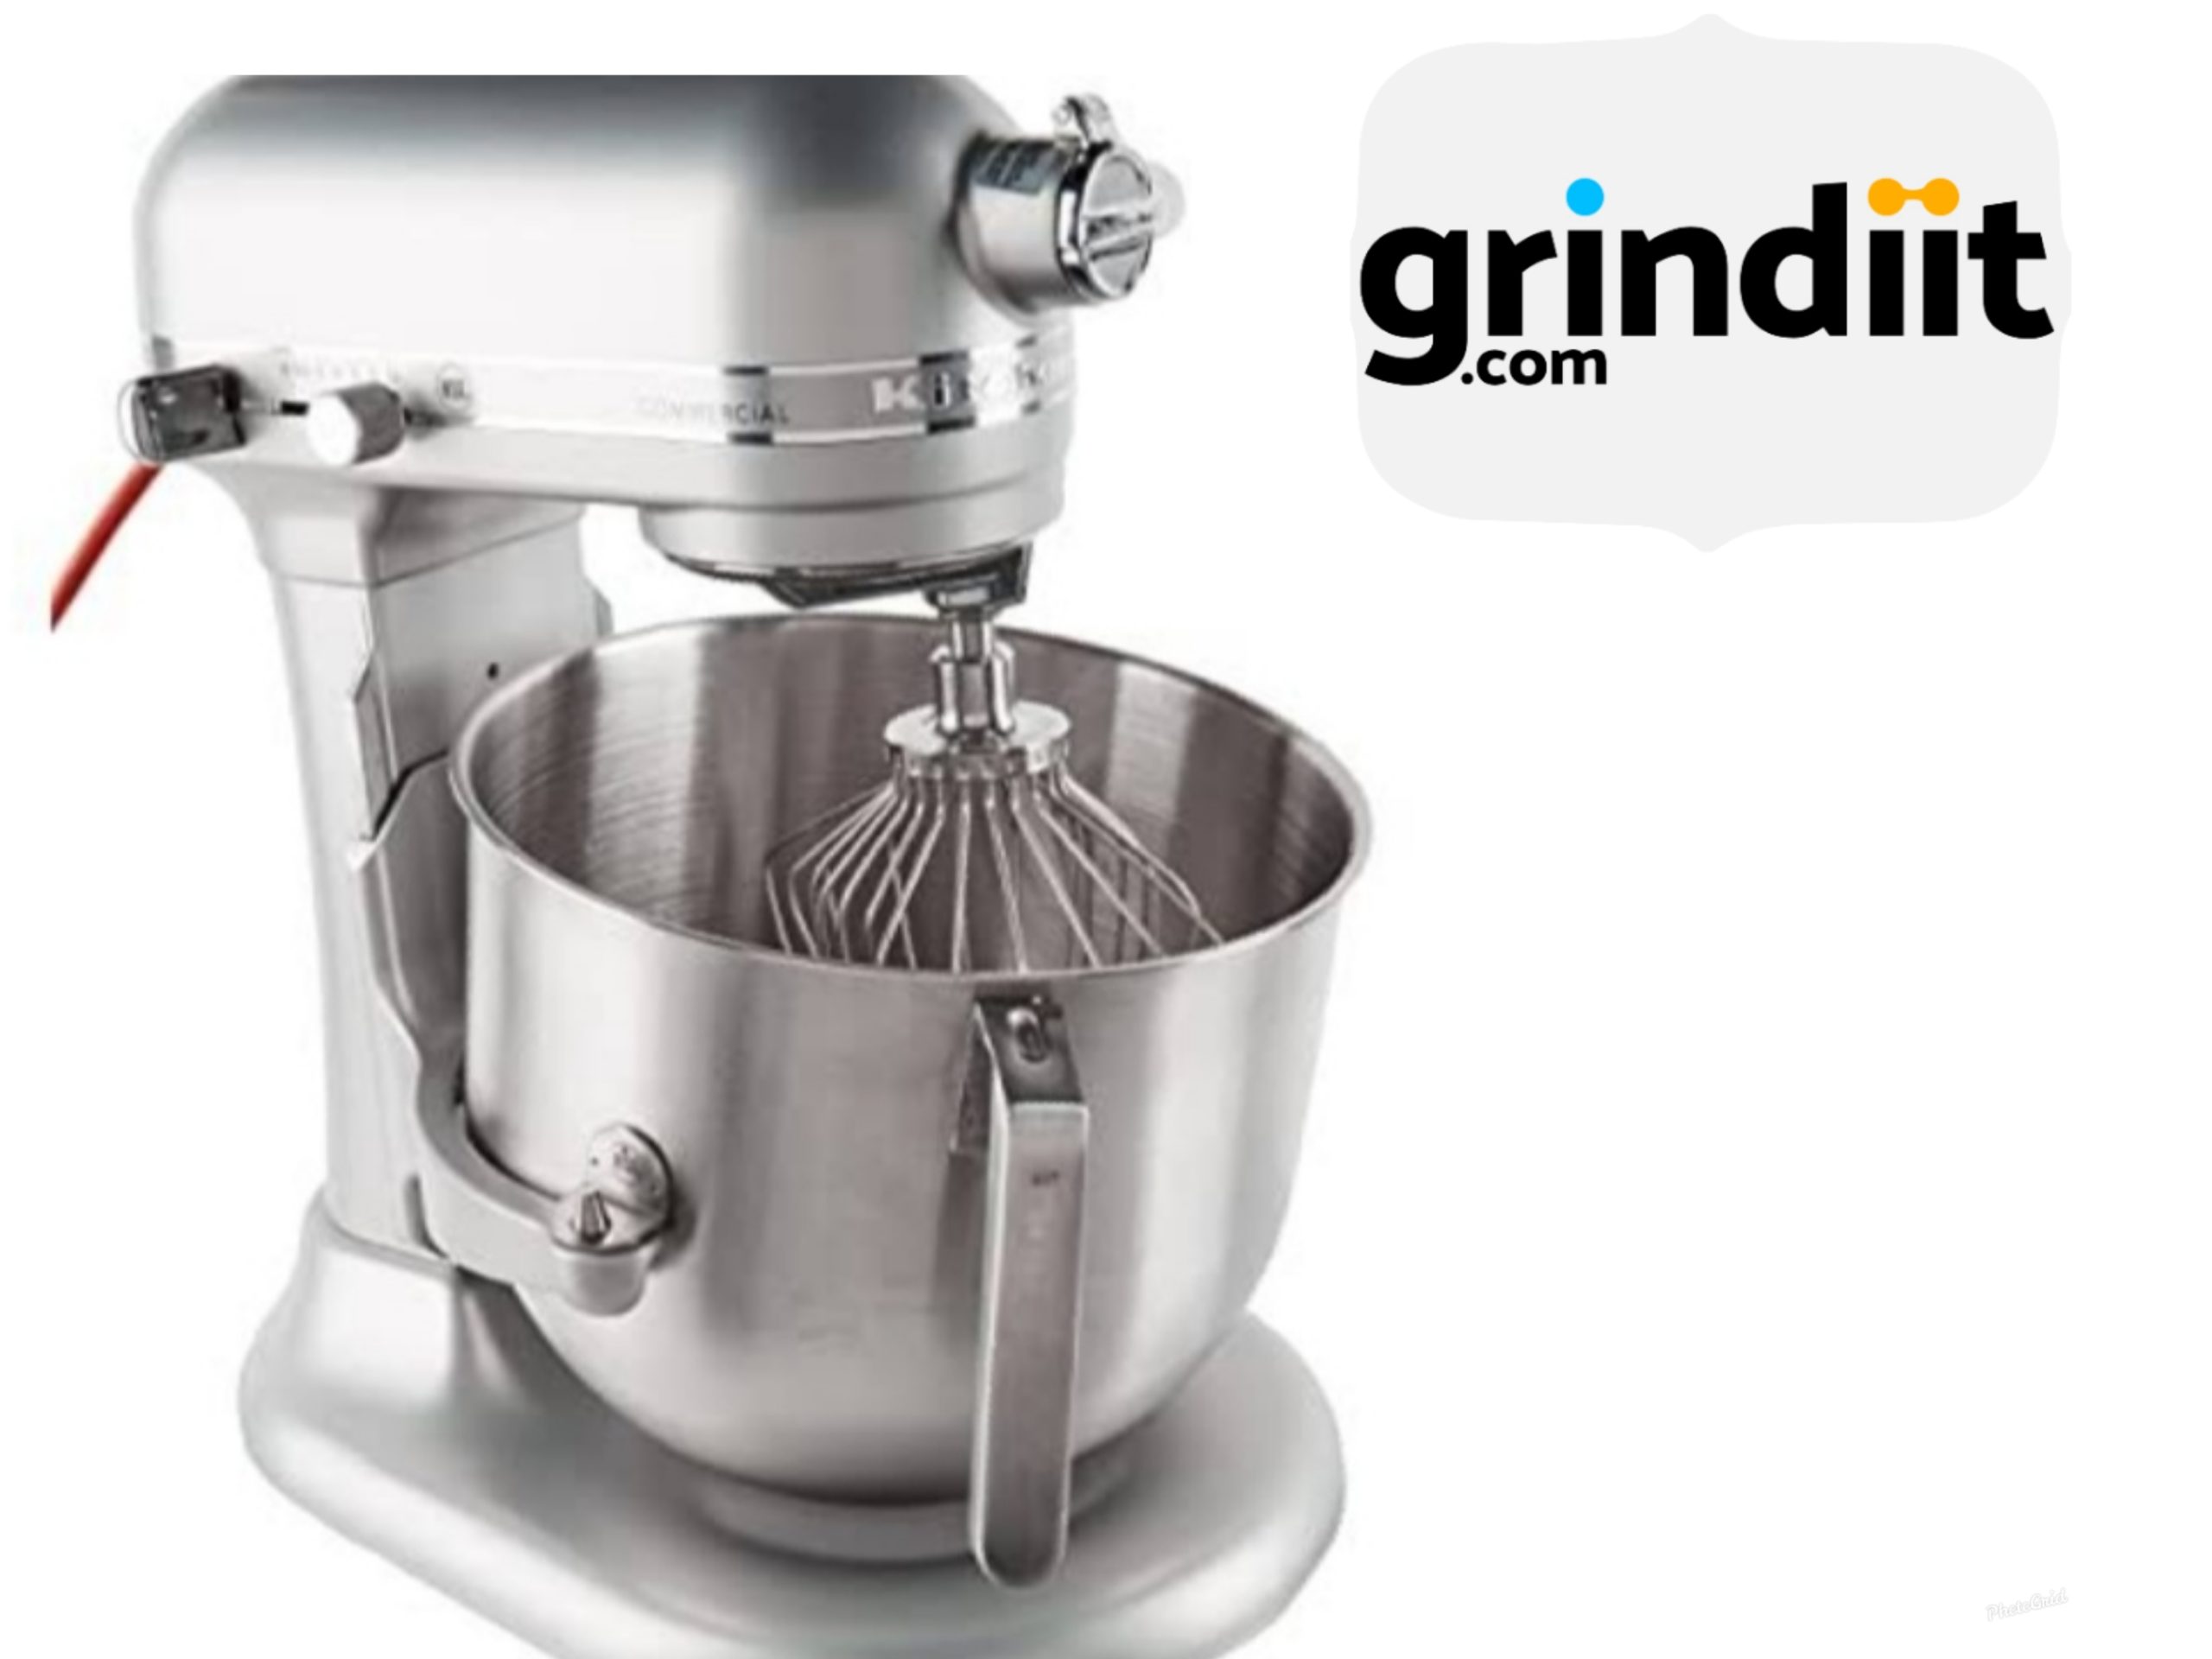 heavy duty mixer grinder for home,  commercial mixer grinder in coimbatore,  heavy duty mixer grinder sujata,  preethi heavy duty mixer grinder,  best heavy duty mixer grinder,  commercial mixer machine,  1400 watt mixer grinder,  heavy duty mixer grinder in mumbai, 